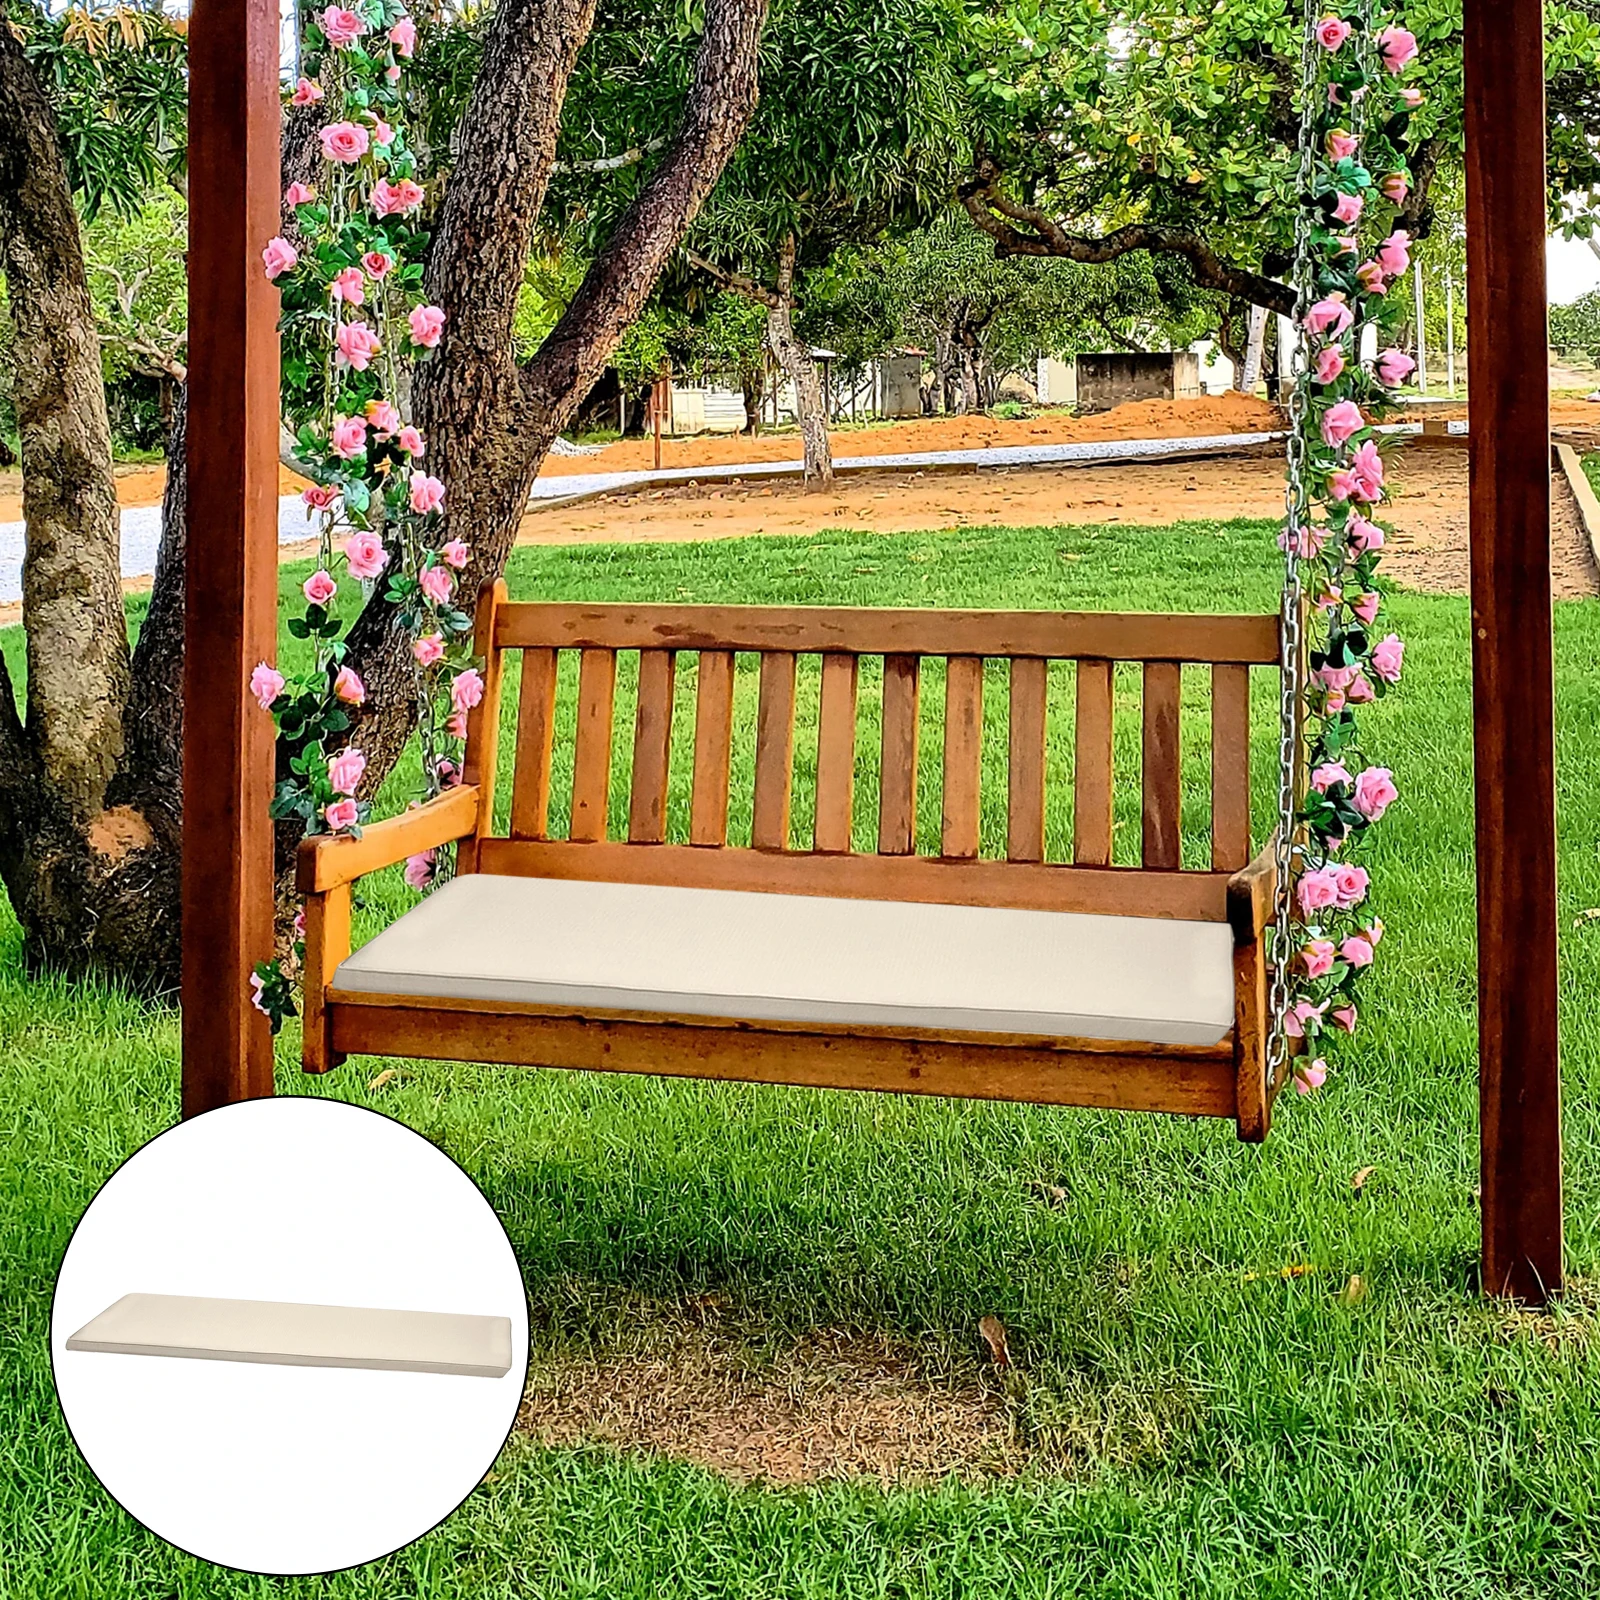 Waterproof Fabric Garden Bench Settee Patio Furniture Pad Seat Pads Chair Cushion Swing Loveseat 3 Seater Outdoor